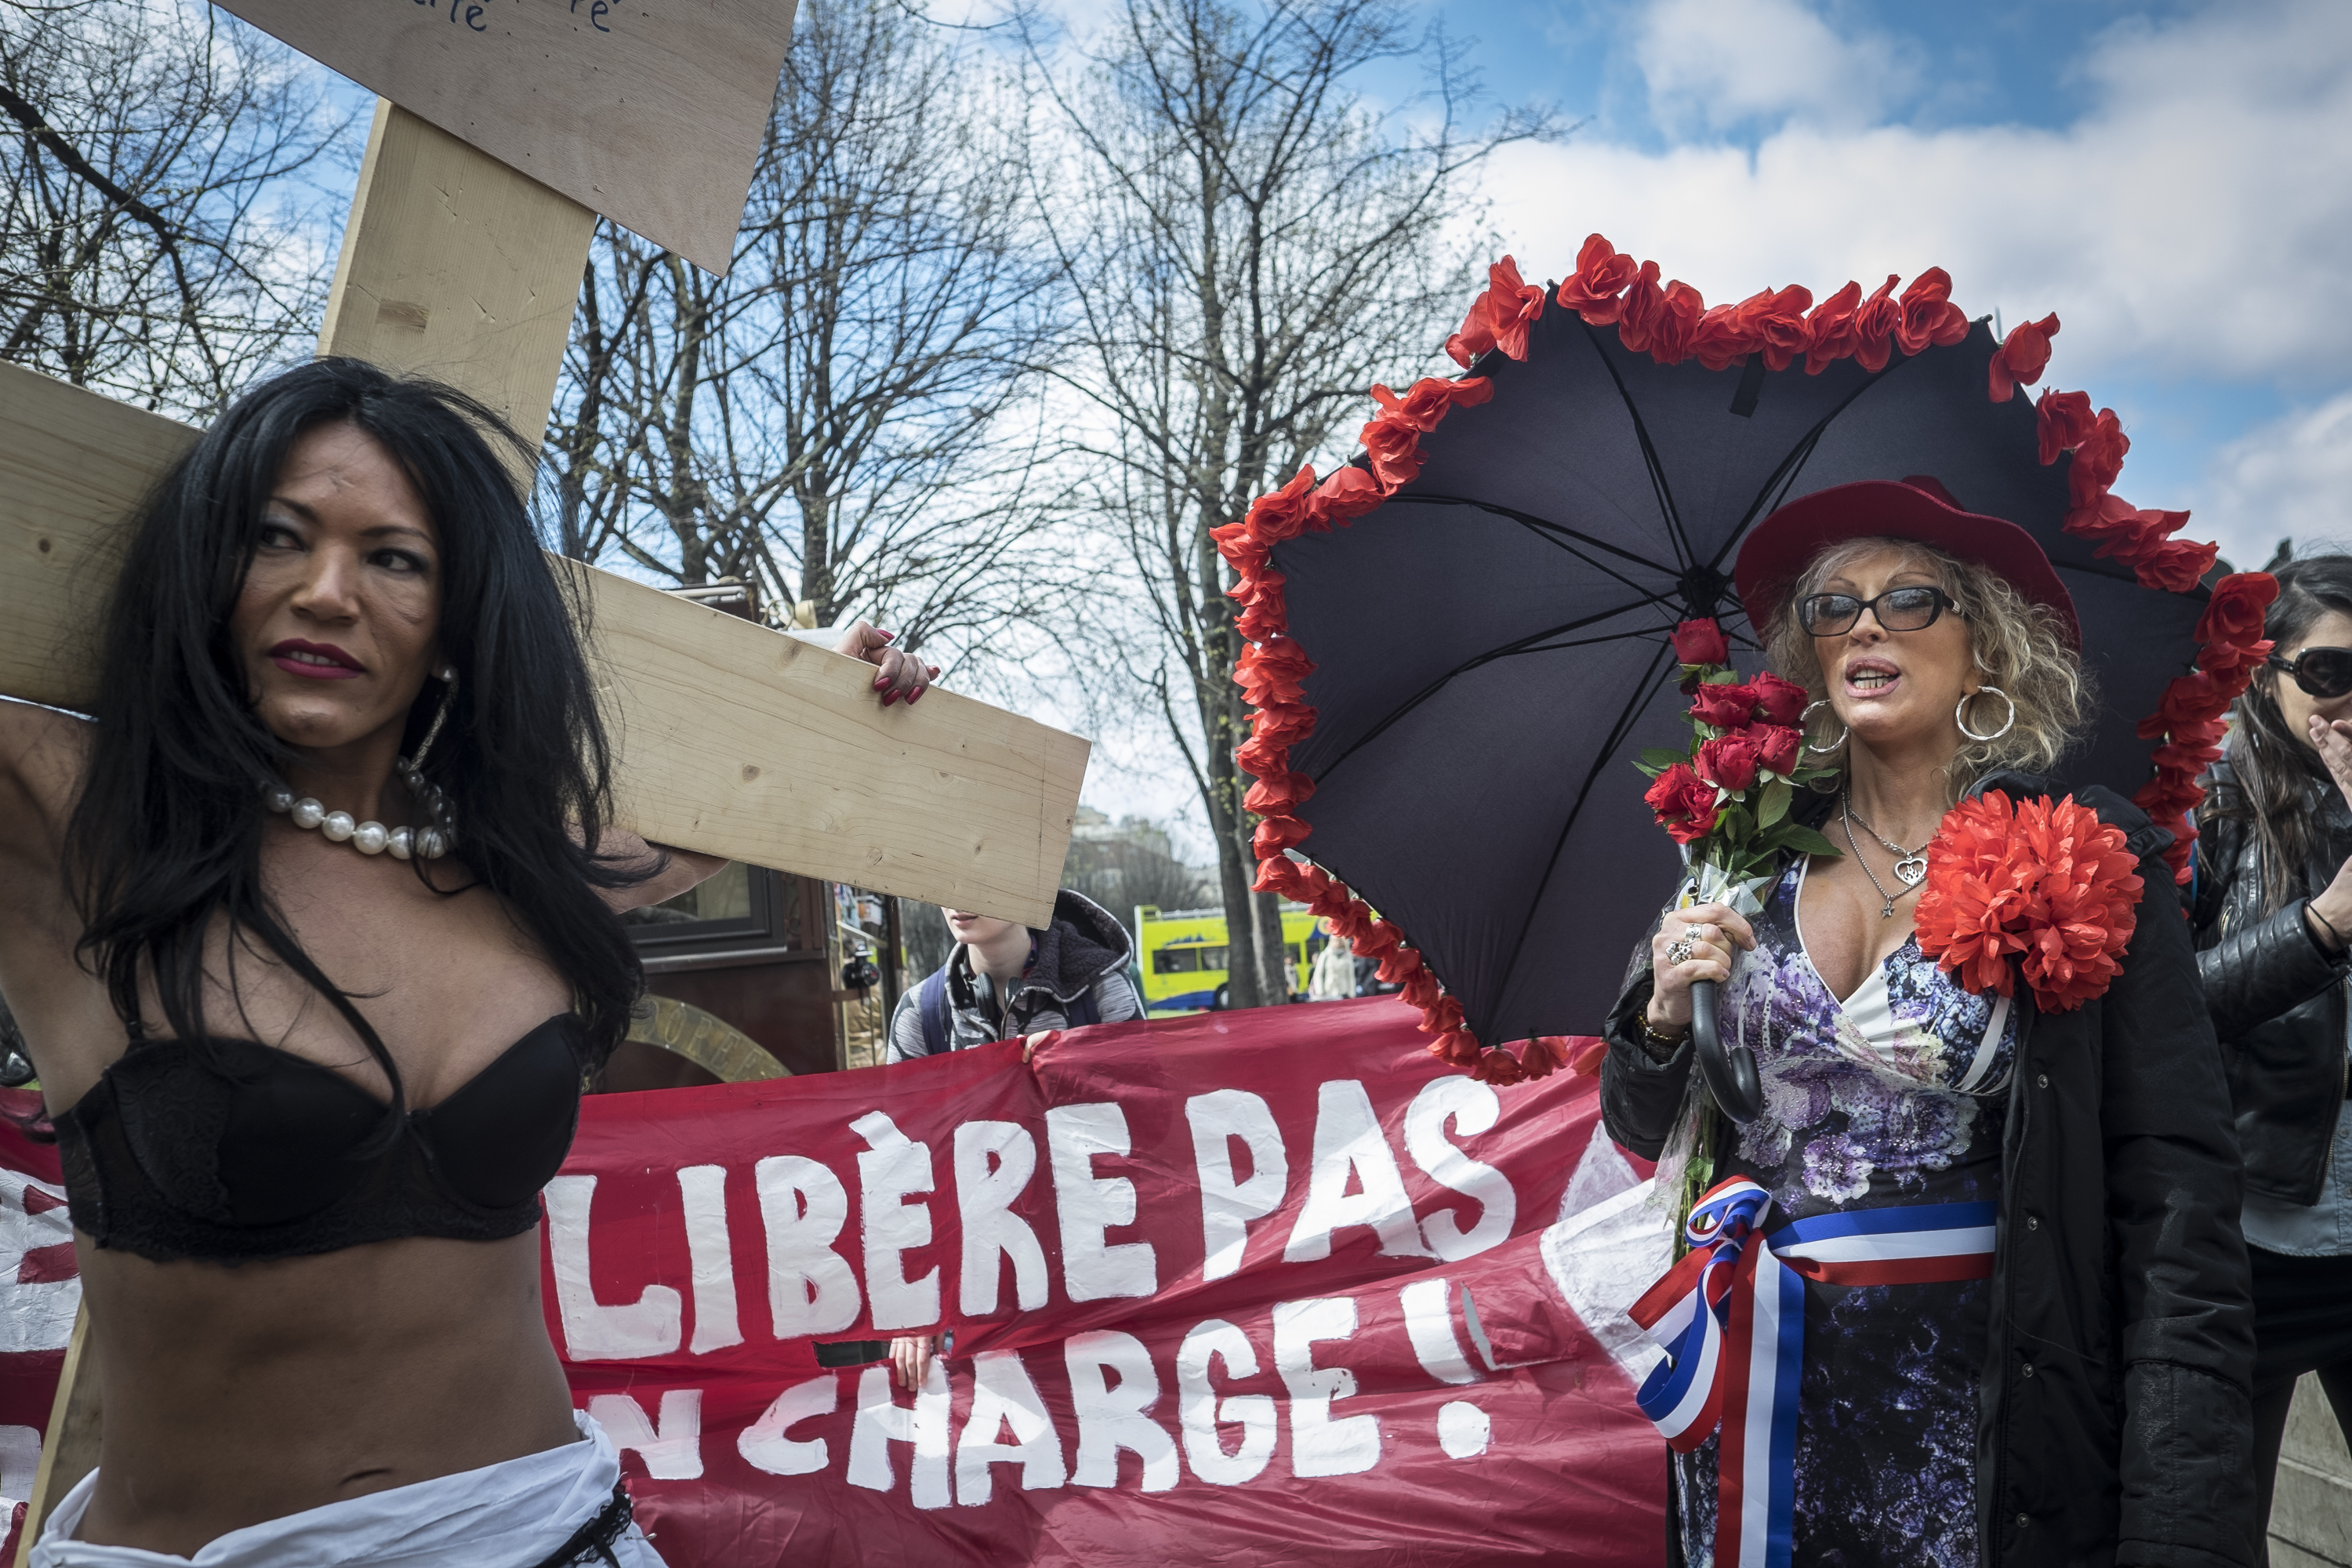 Sex workers and supporters protest near the French National Assembly in Paris on April 6, 2016, as French lawmakers take part in a final debate on a bill that would make it illegal to pay for sex (Olivier Donnars—AP)